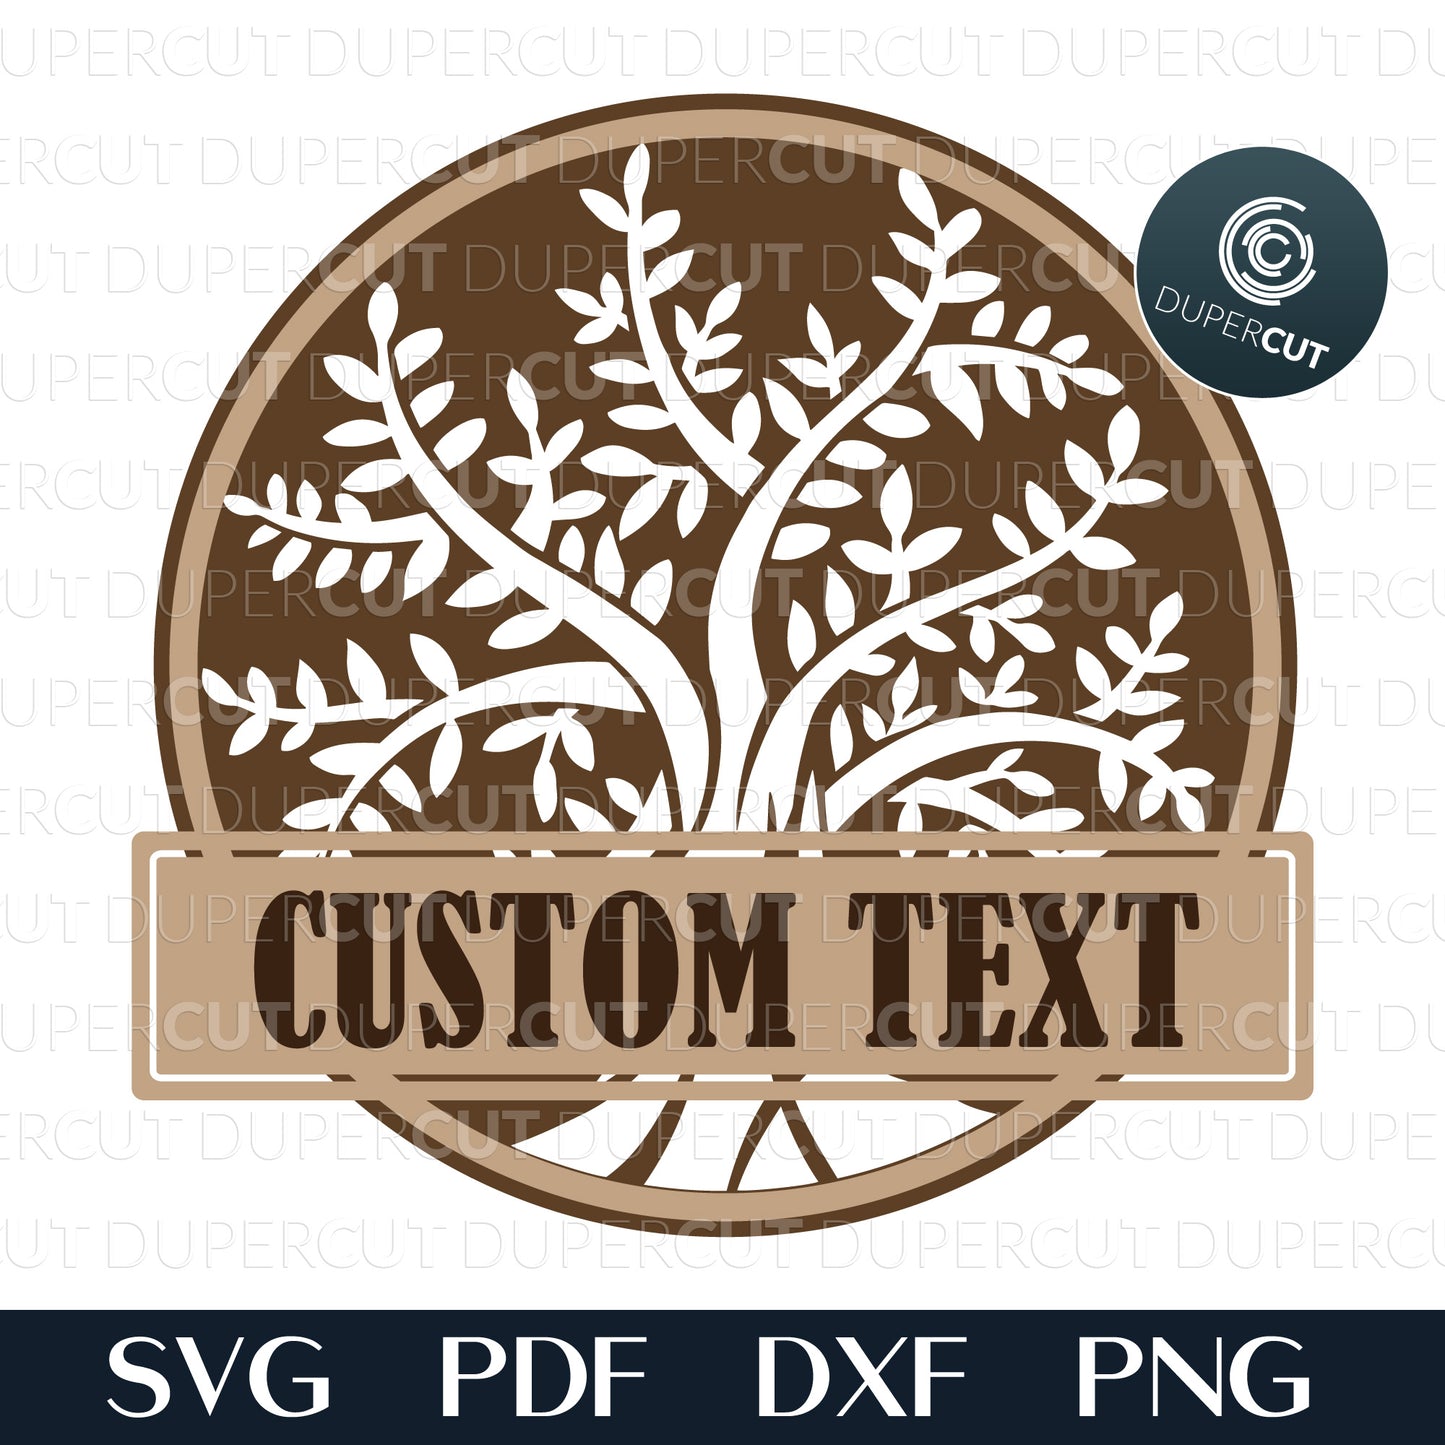 Tree of life personalized sign cabin decoration - SVG PDF DXF layered files for laser cutting machines - Glowforge, CNC plasma, Cricut, Silhouette cameo  by DuperCut